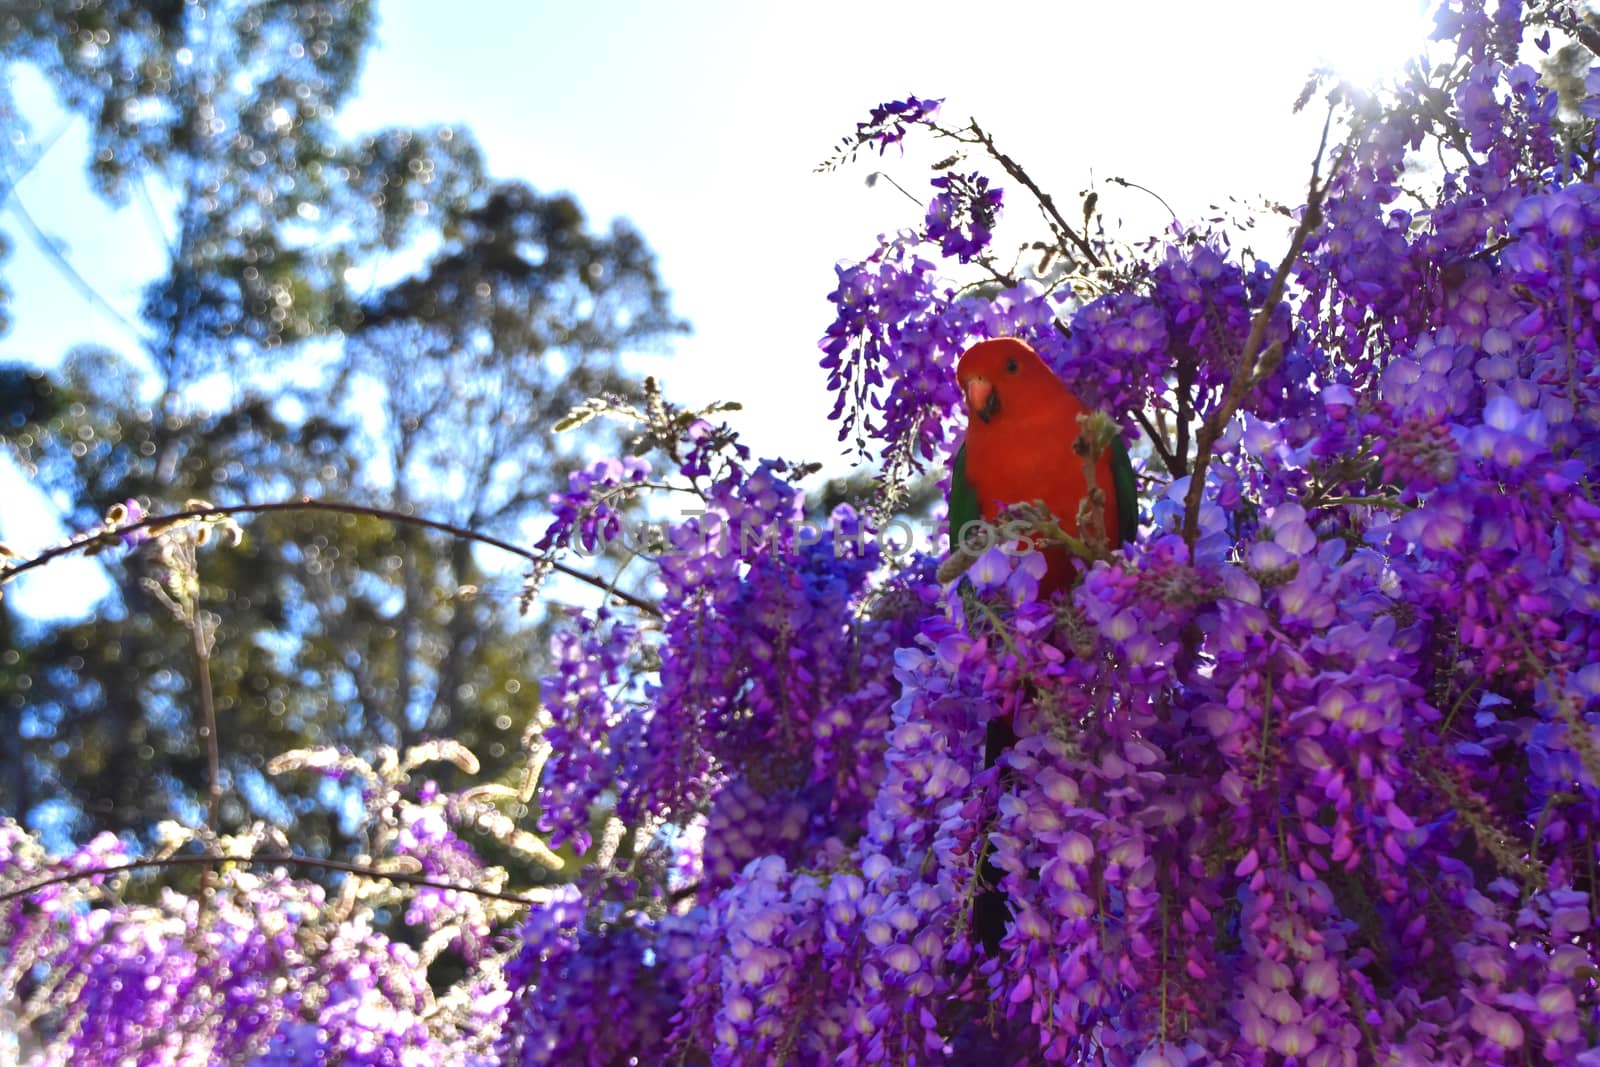 A male King Parrot sitting in a wisteria tree